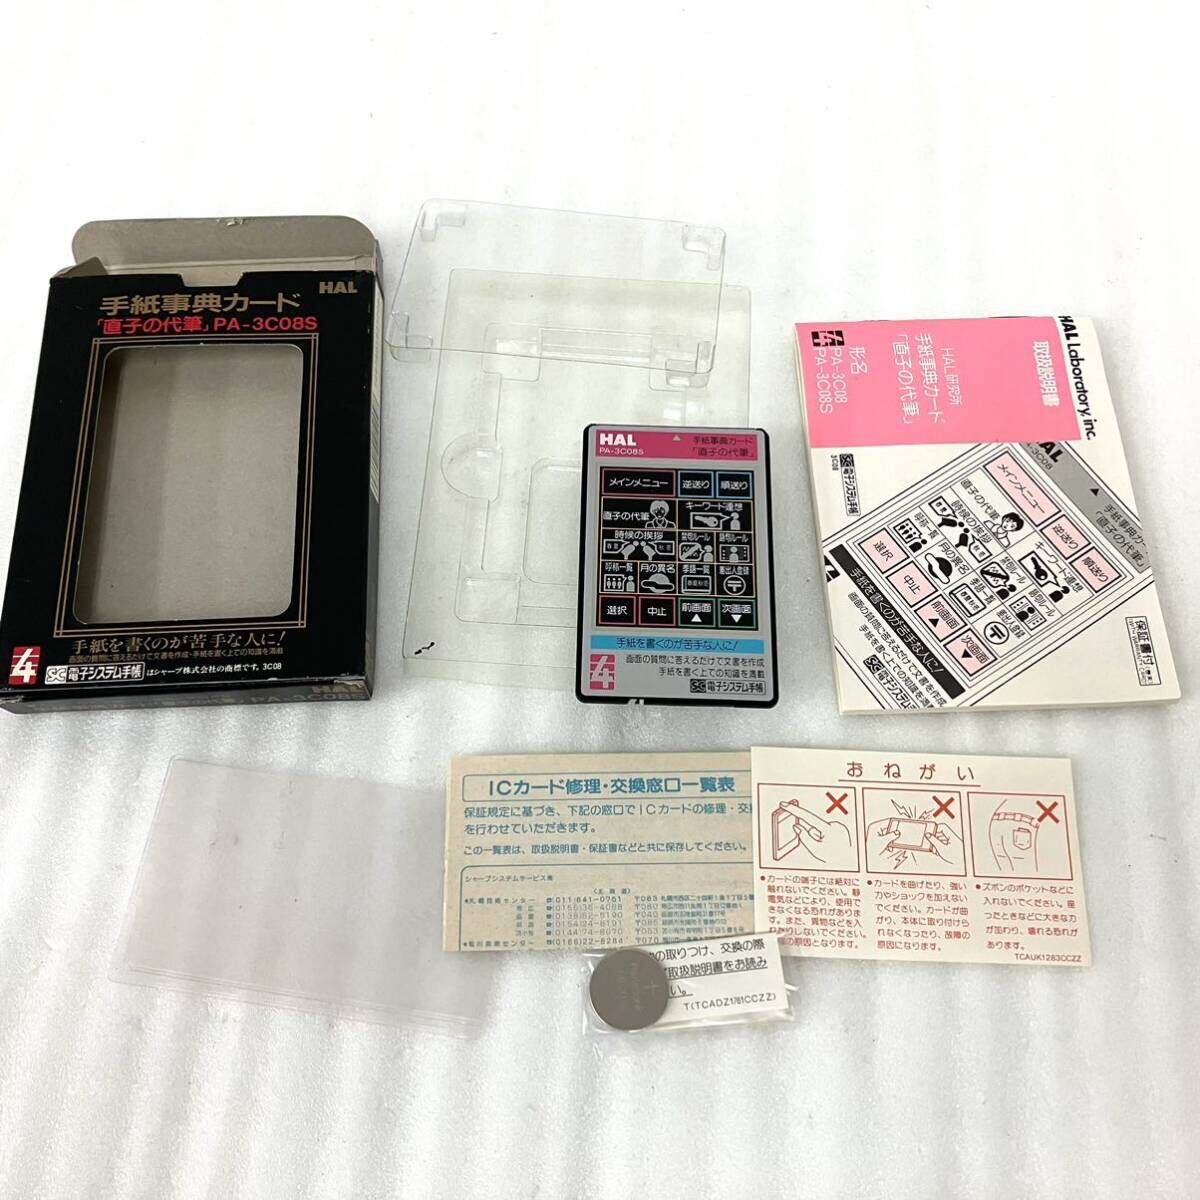  rare unused beautiful goods letter lexicon card direct .. fee writing brush PA-3C08S HAL research place SHARP sharp electron personal organiser PA-8600 8500 7550 7500 7000 retro 